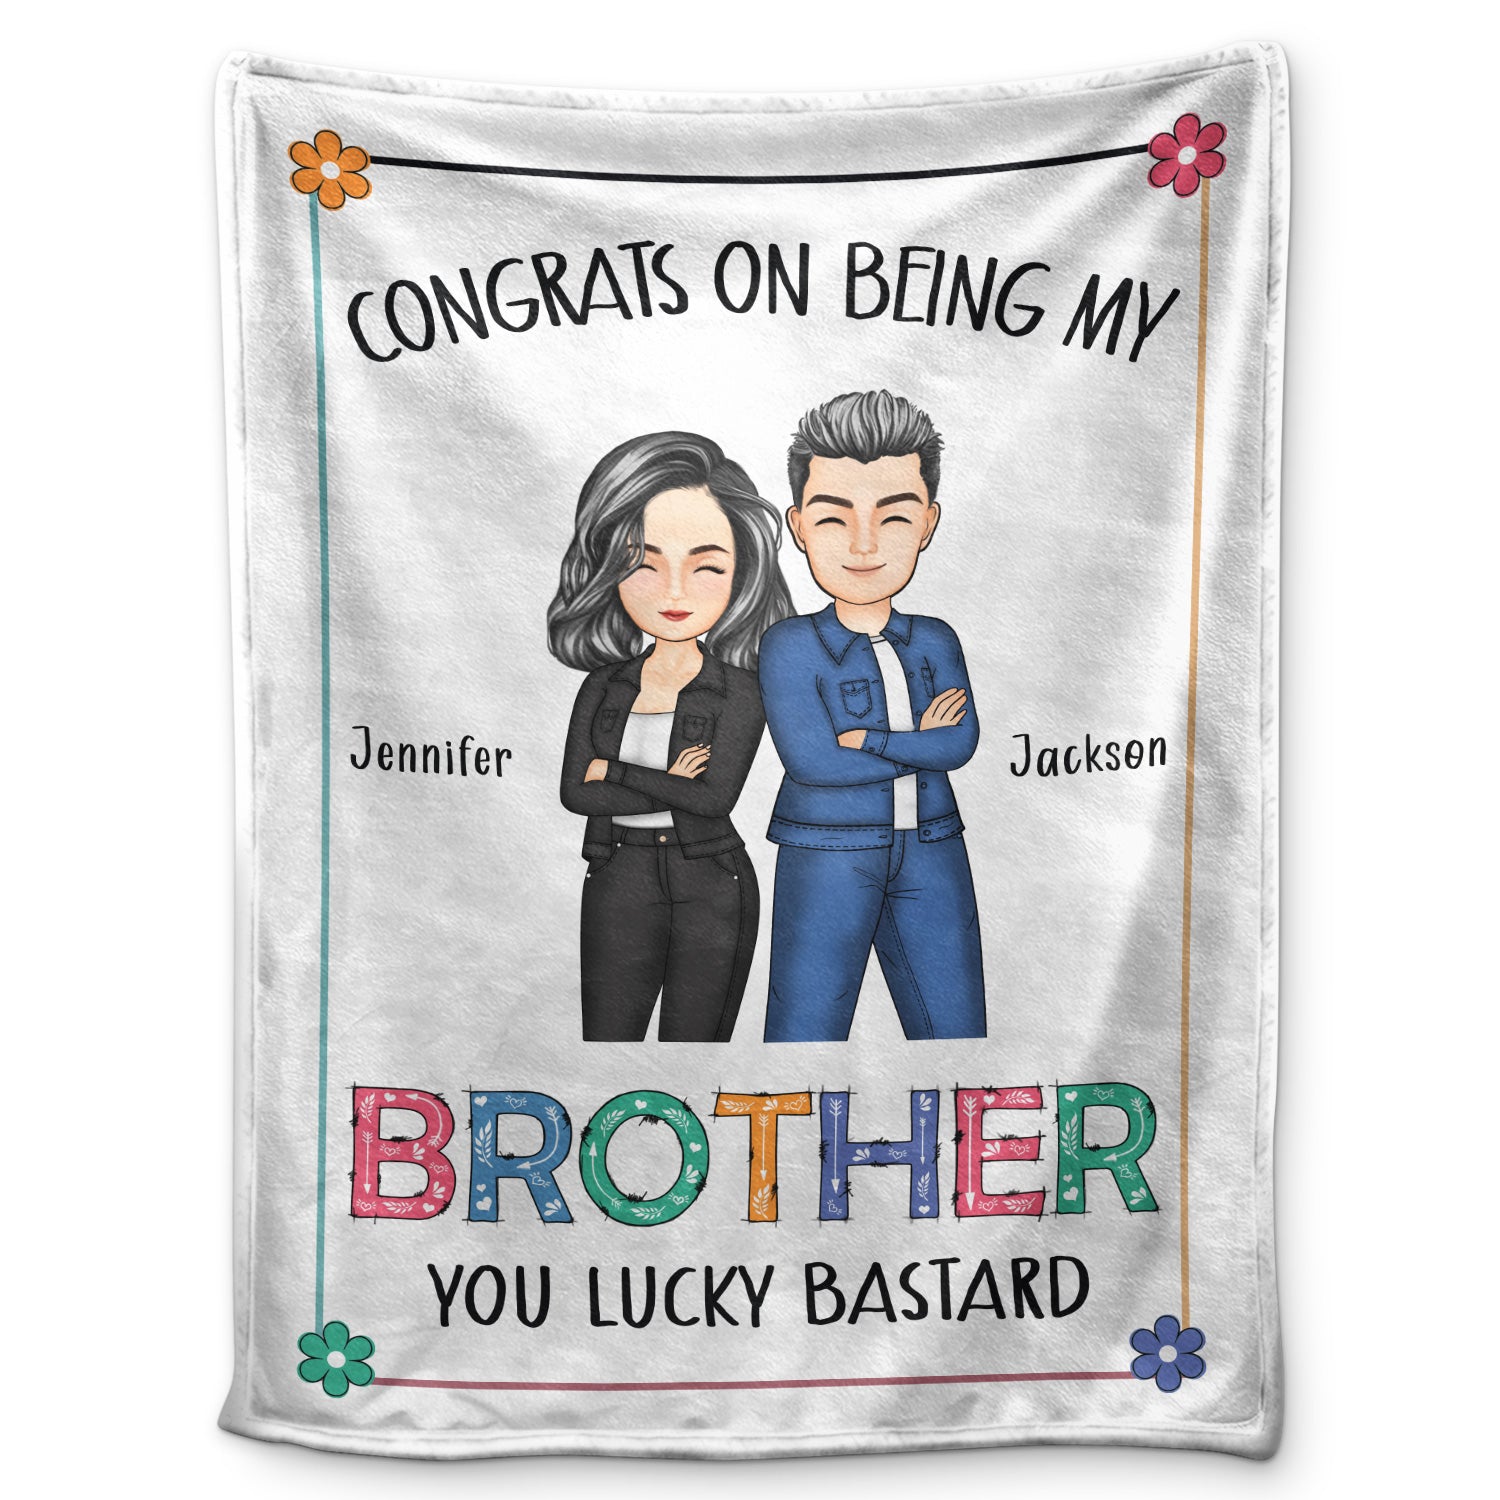 Sibling Congrats On Being My Brother - Gift For Sibling - Personalized Fleece Blanket